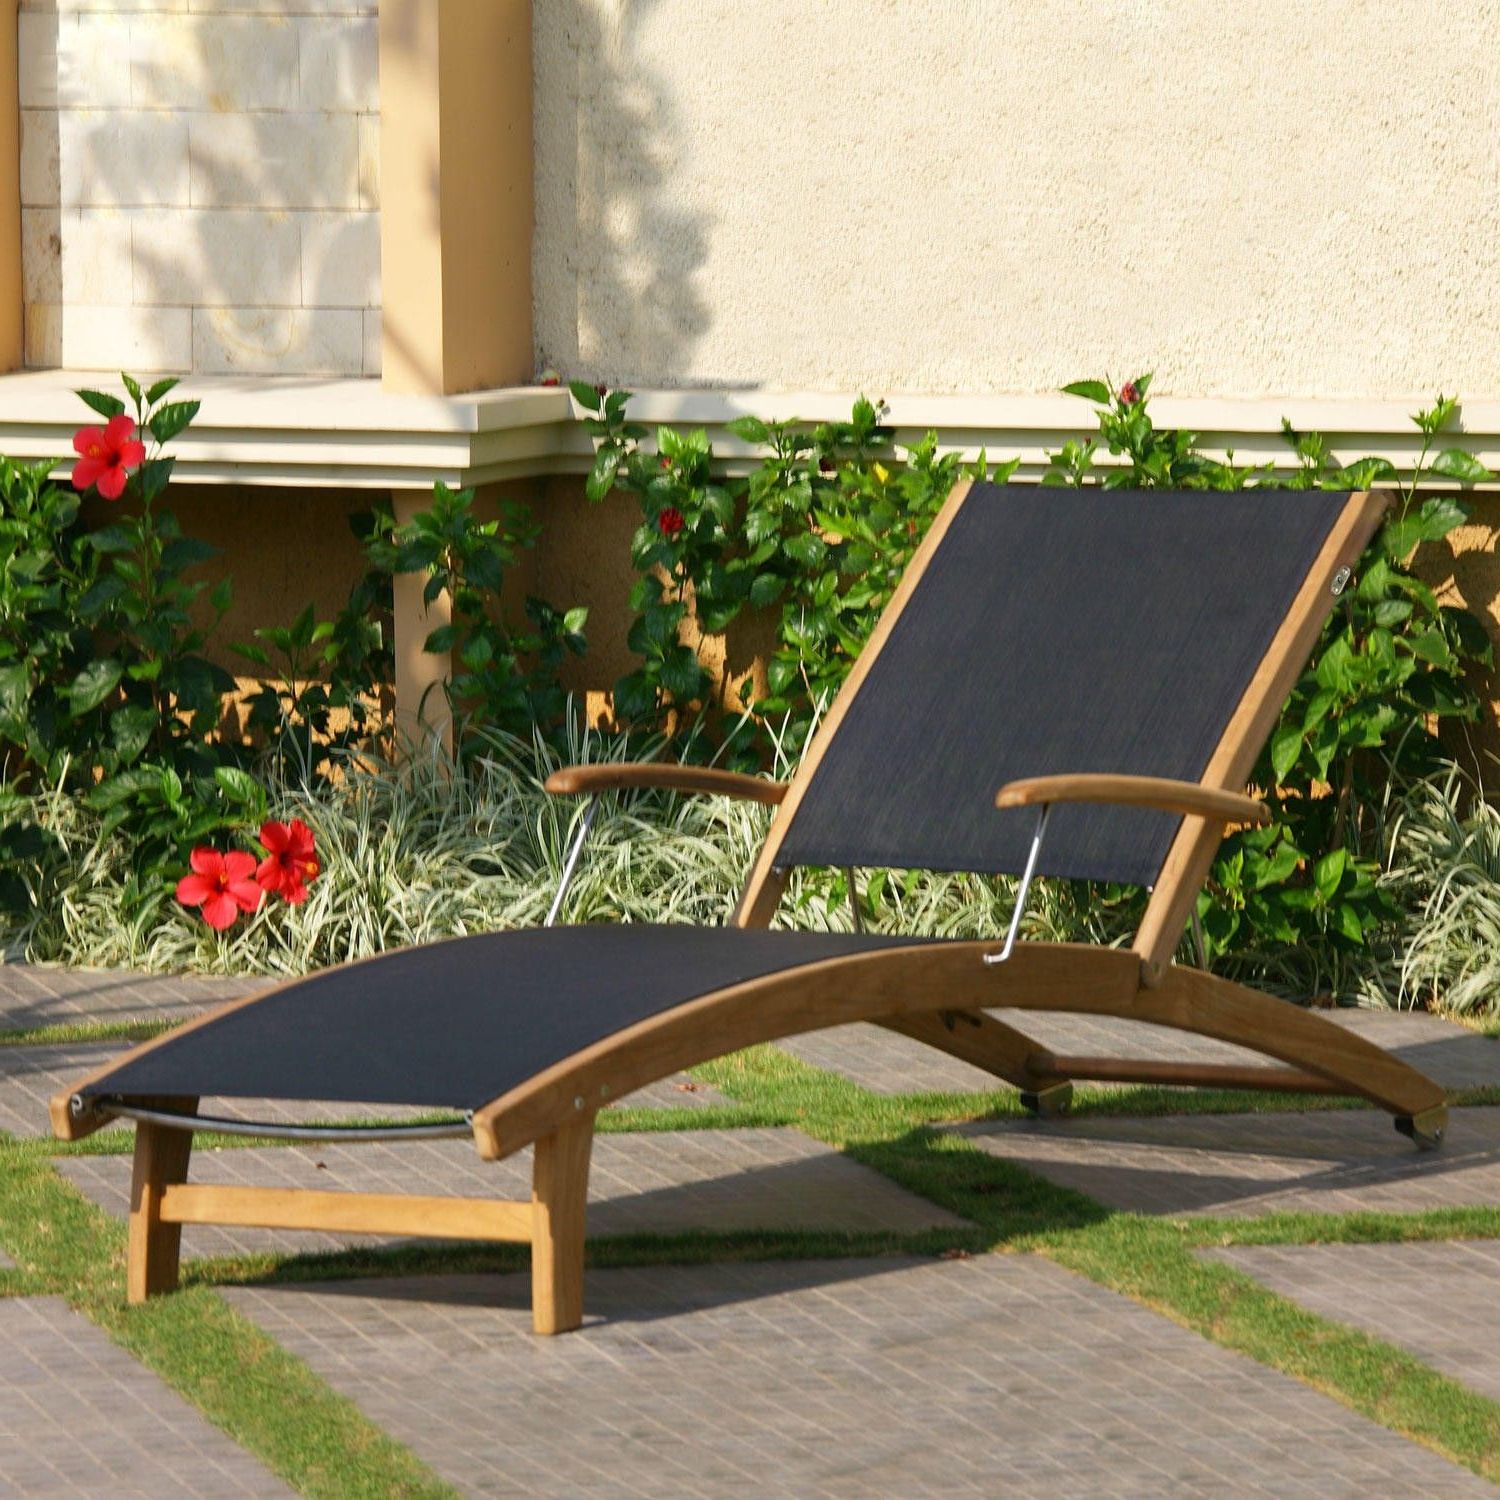 Sling Patio Chaise Lounges Throughout Famous Rivera Teak Sling Lounge Chair – Outdoor Chaise Lounges (View 16 of 25)